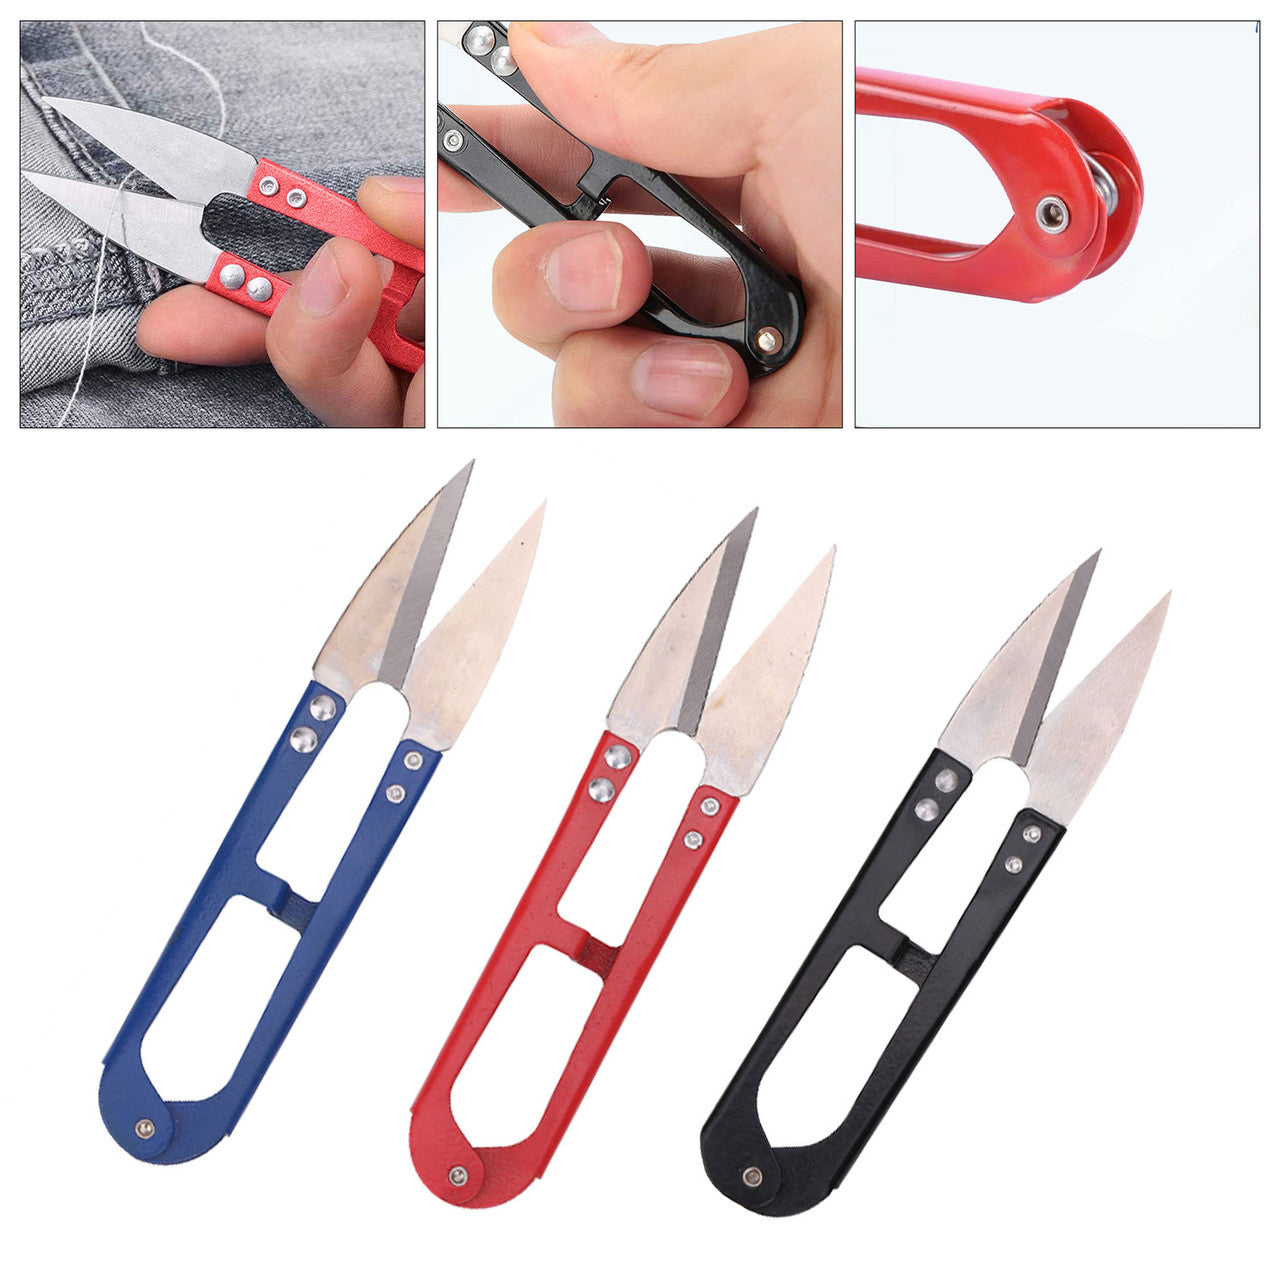 EOTVIA 3Pcs Thread Snips Stainless Steel Smoothing Easy Cutting Small  Fabric Scissors Sewing Supplies,Sewing Snips,Thread Cutter